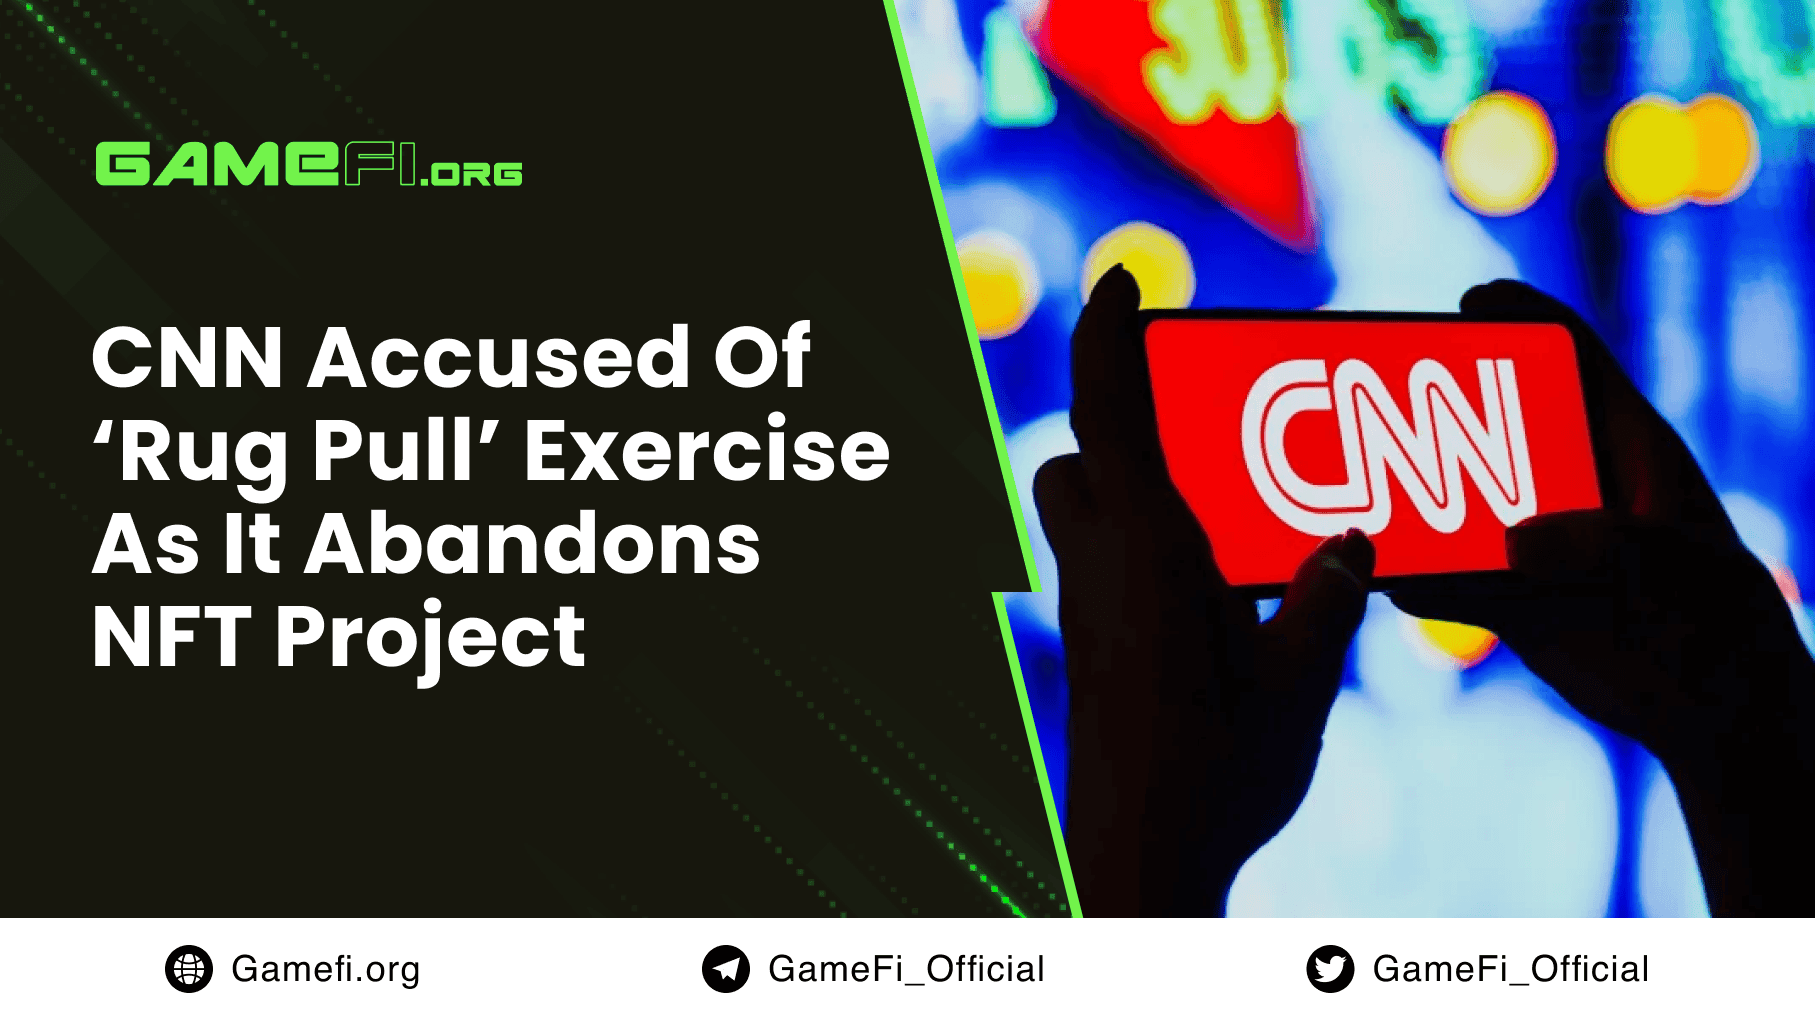 CNN Accused of ‘Rug Pull’ Exercise as It Abandons Nft Project